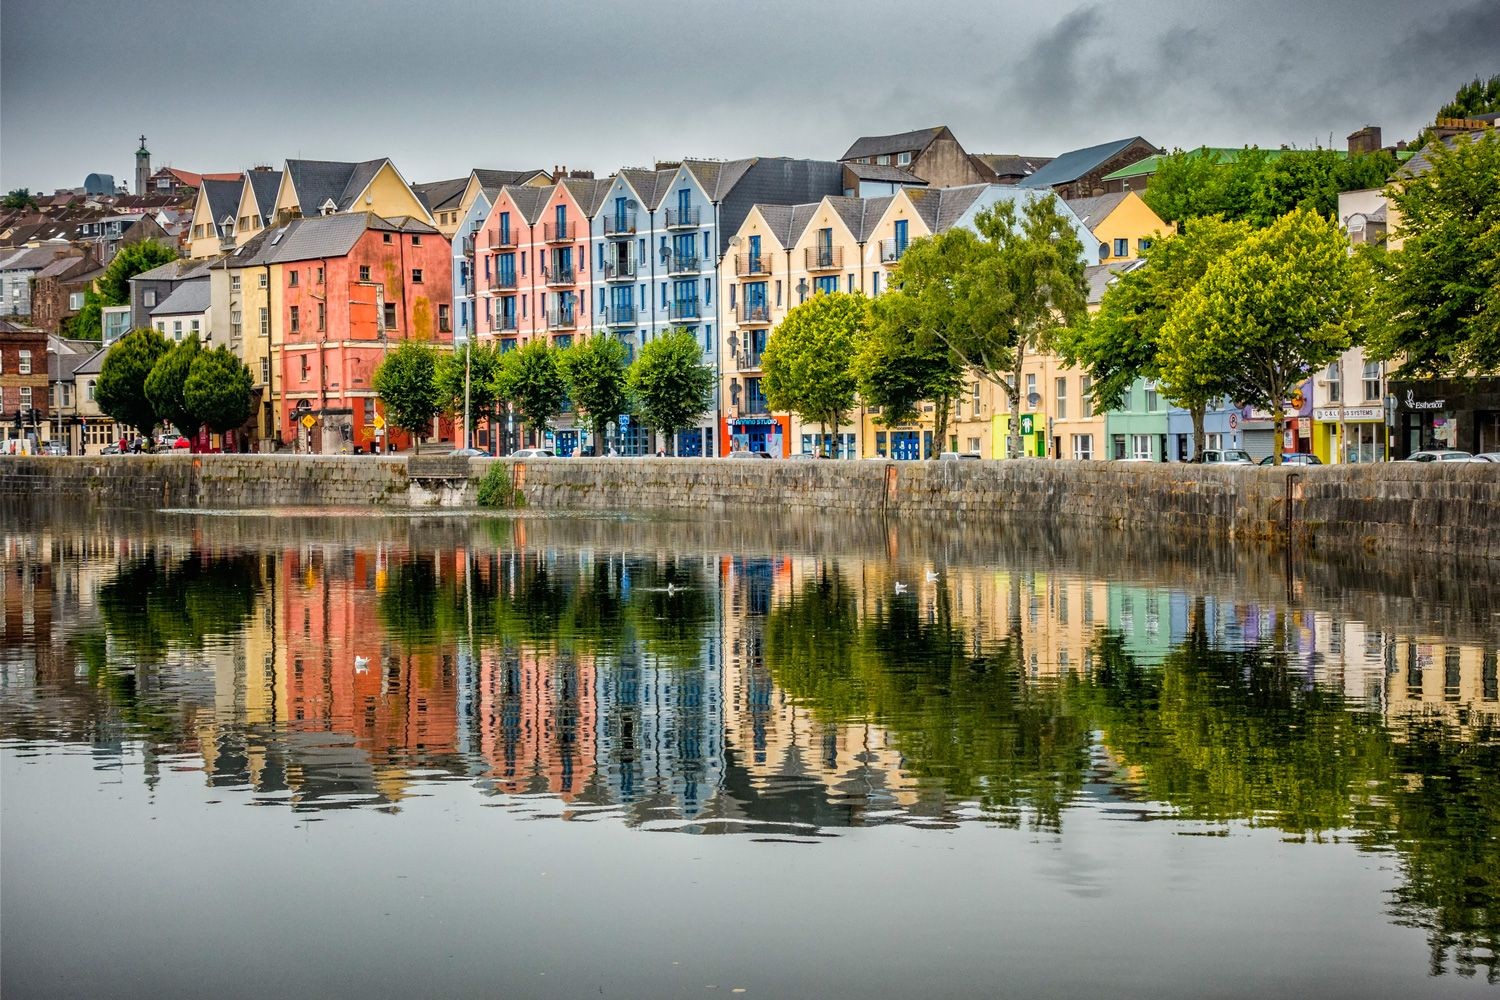 The absolute best time to plan your visit to Cork, Ireland